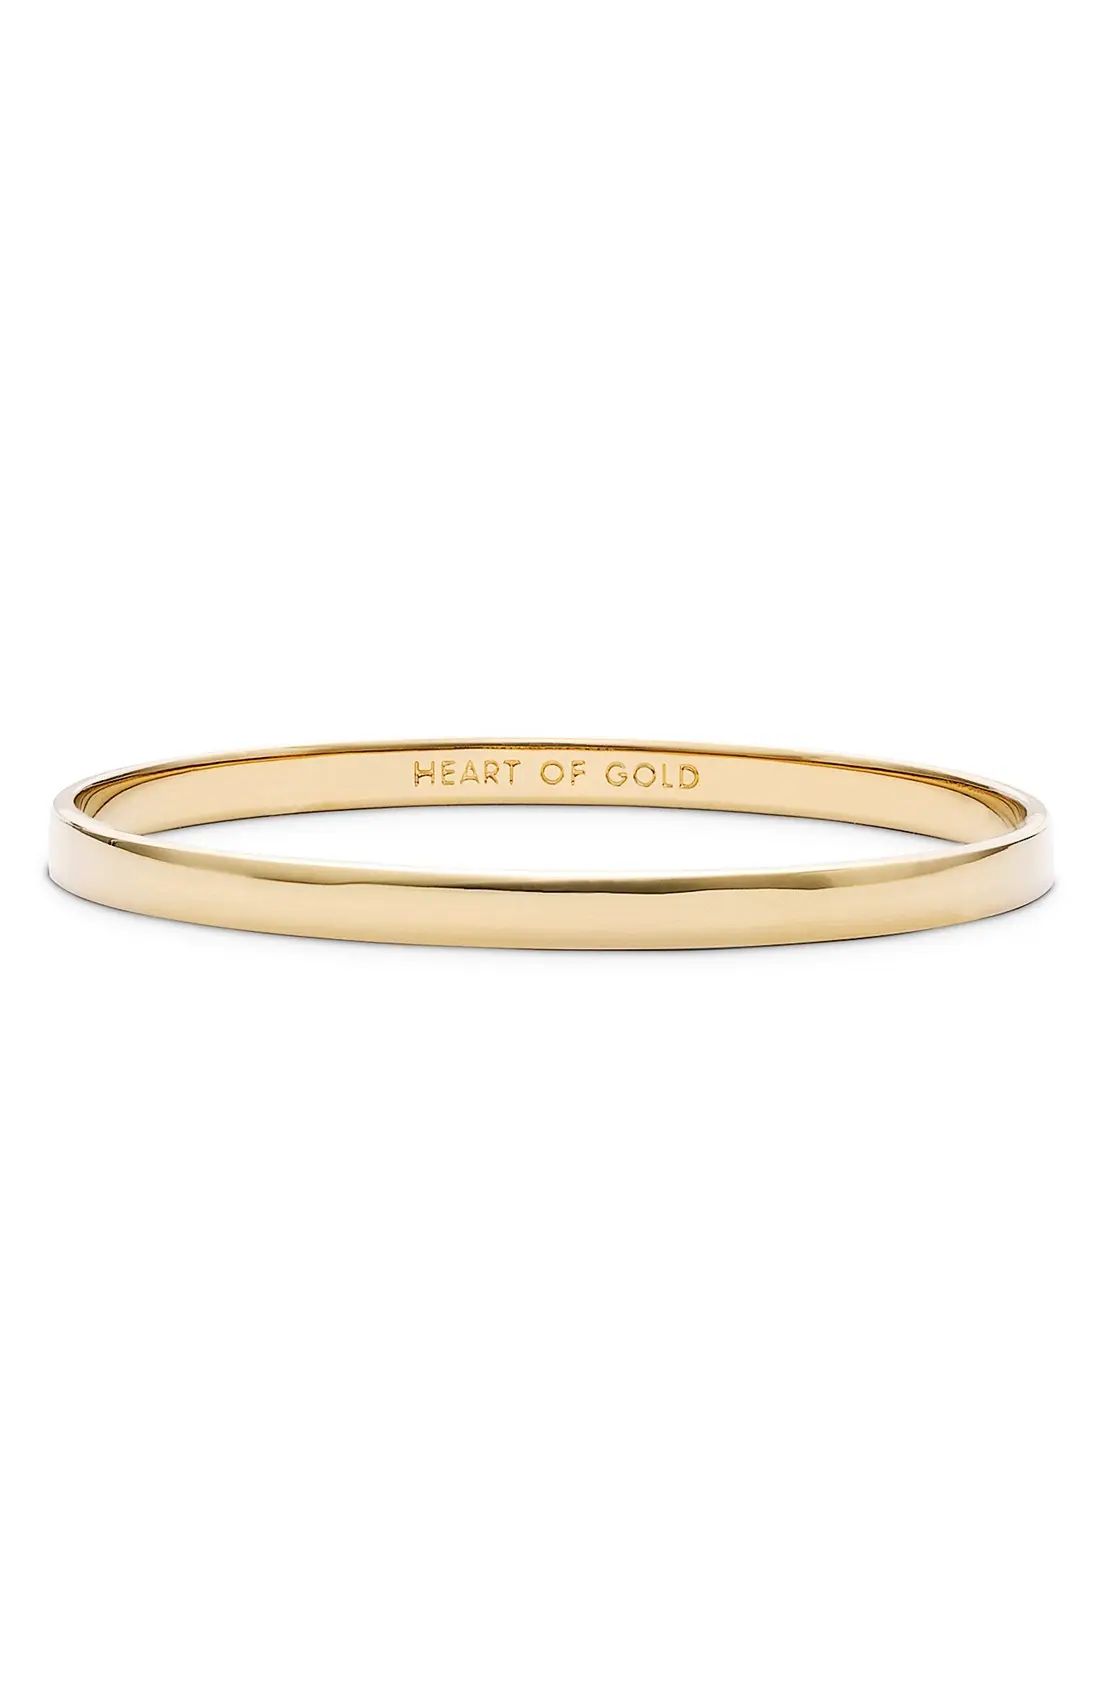 kate spade new york 'idiom - heart of gold' bangle | Nordstrom